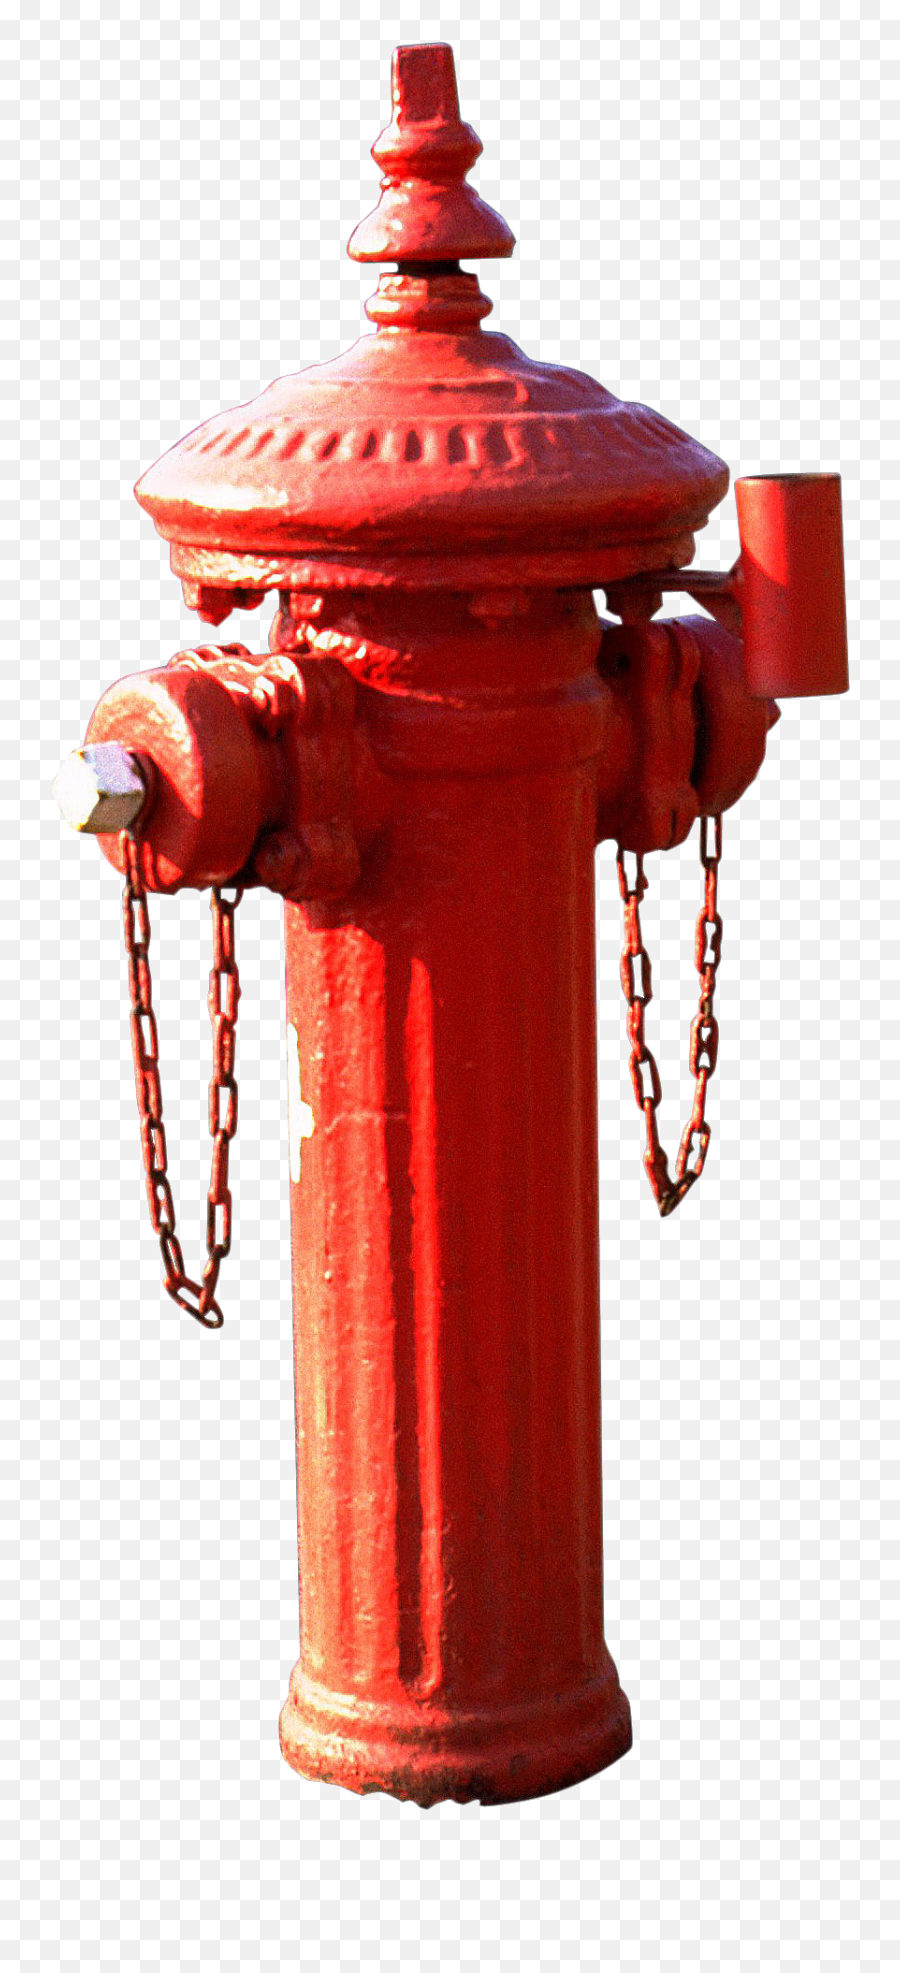 Fire Hydrant Png Emoji,Fire Hydrant Clipart